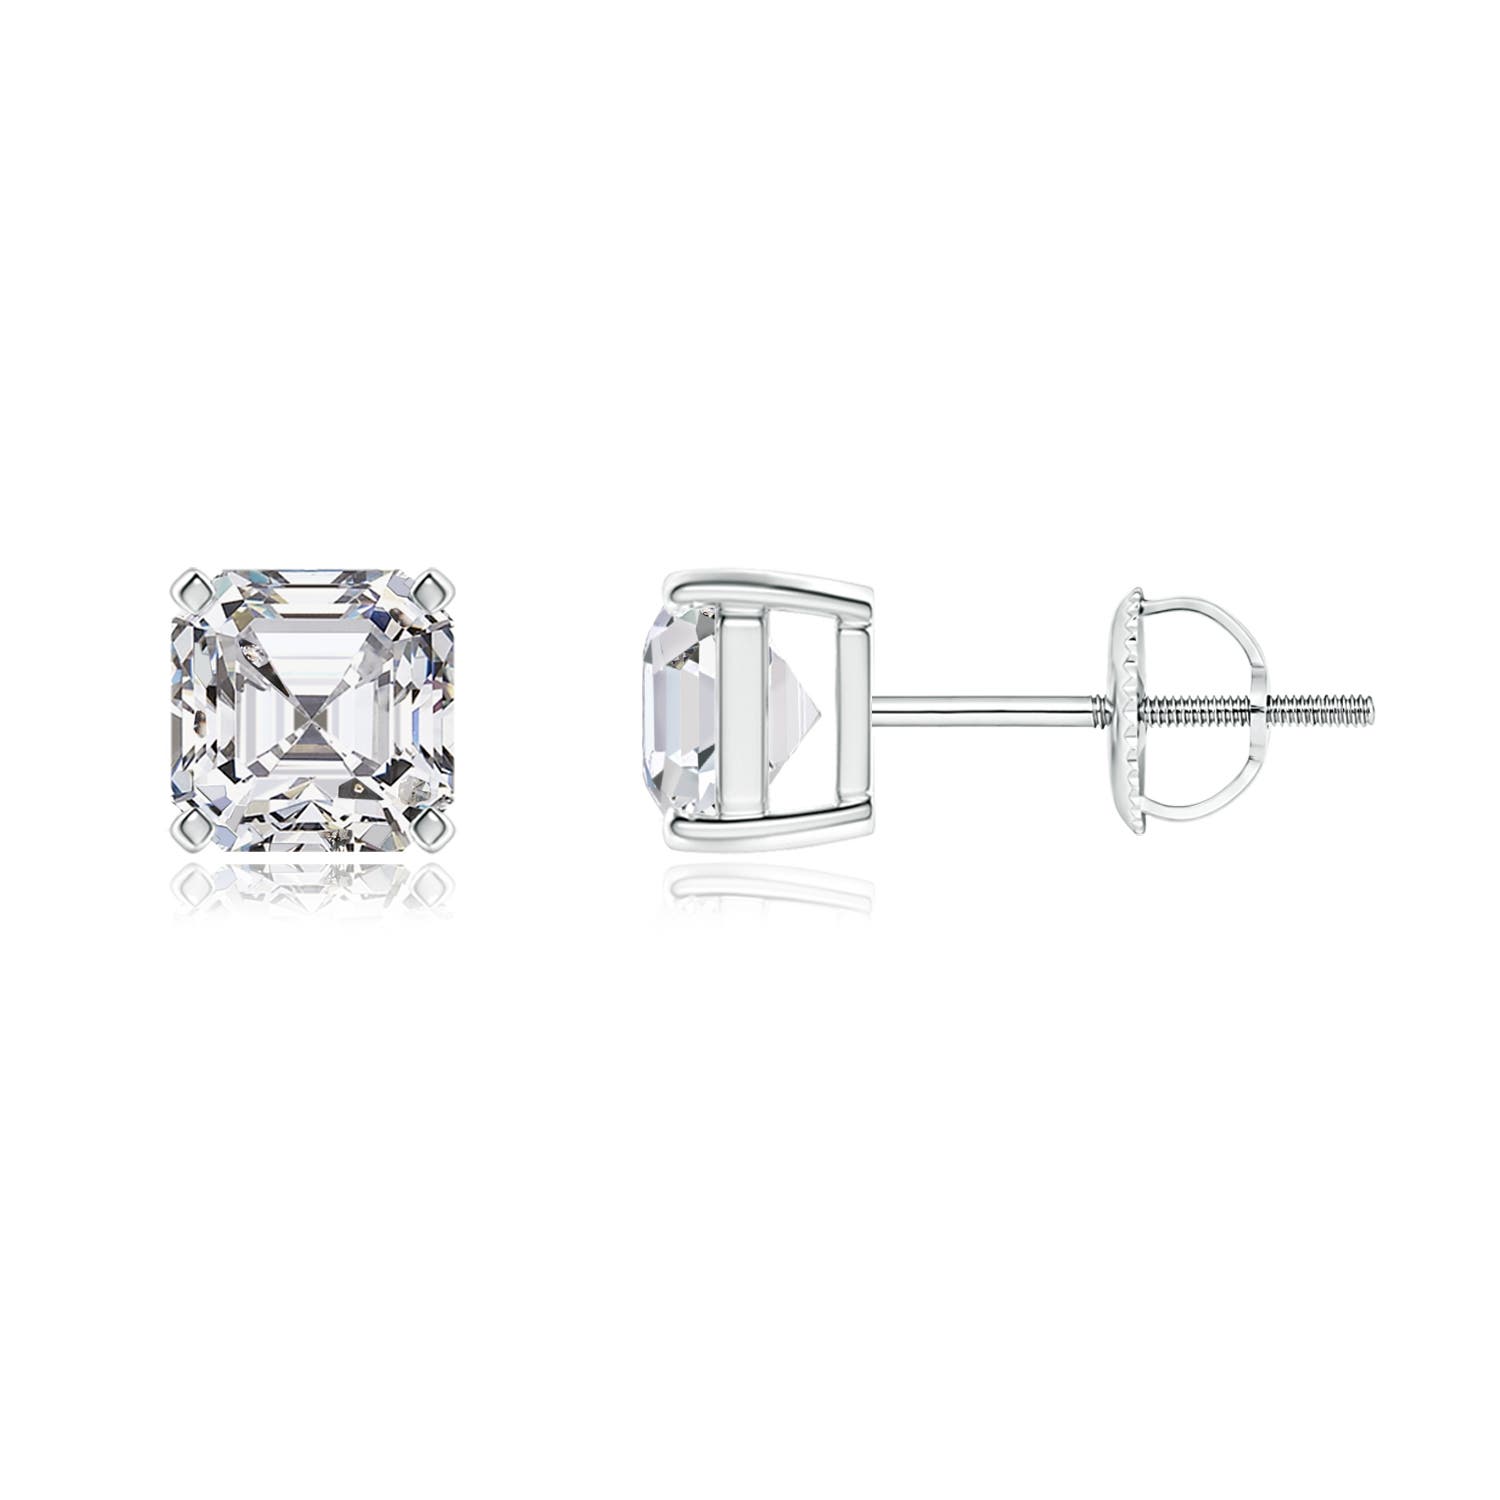 H, SI2 / 1.6 CT / 14 KT White Gold